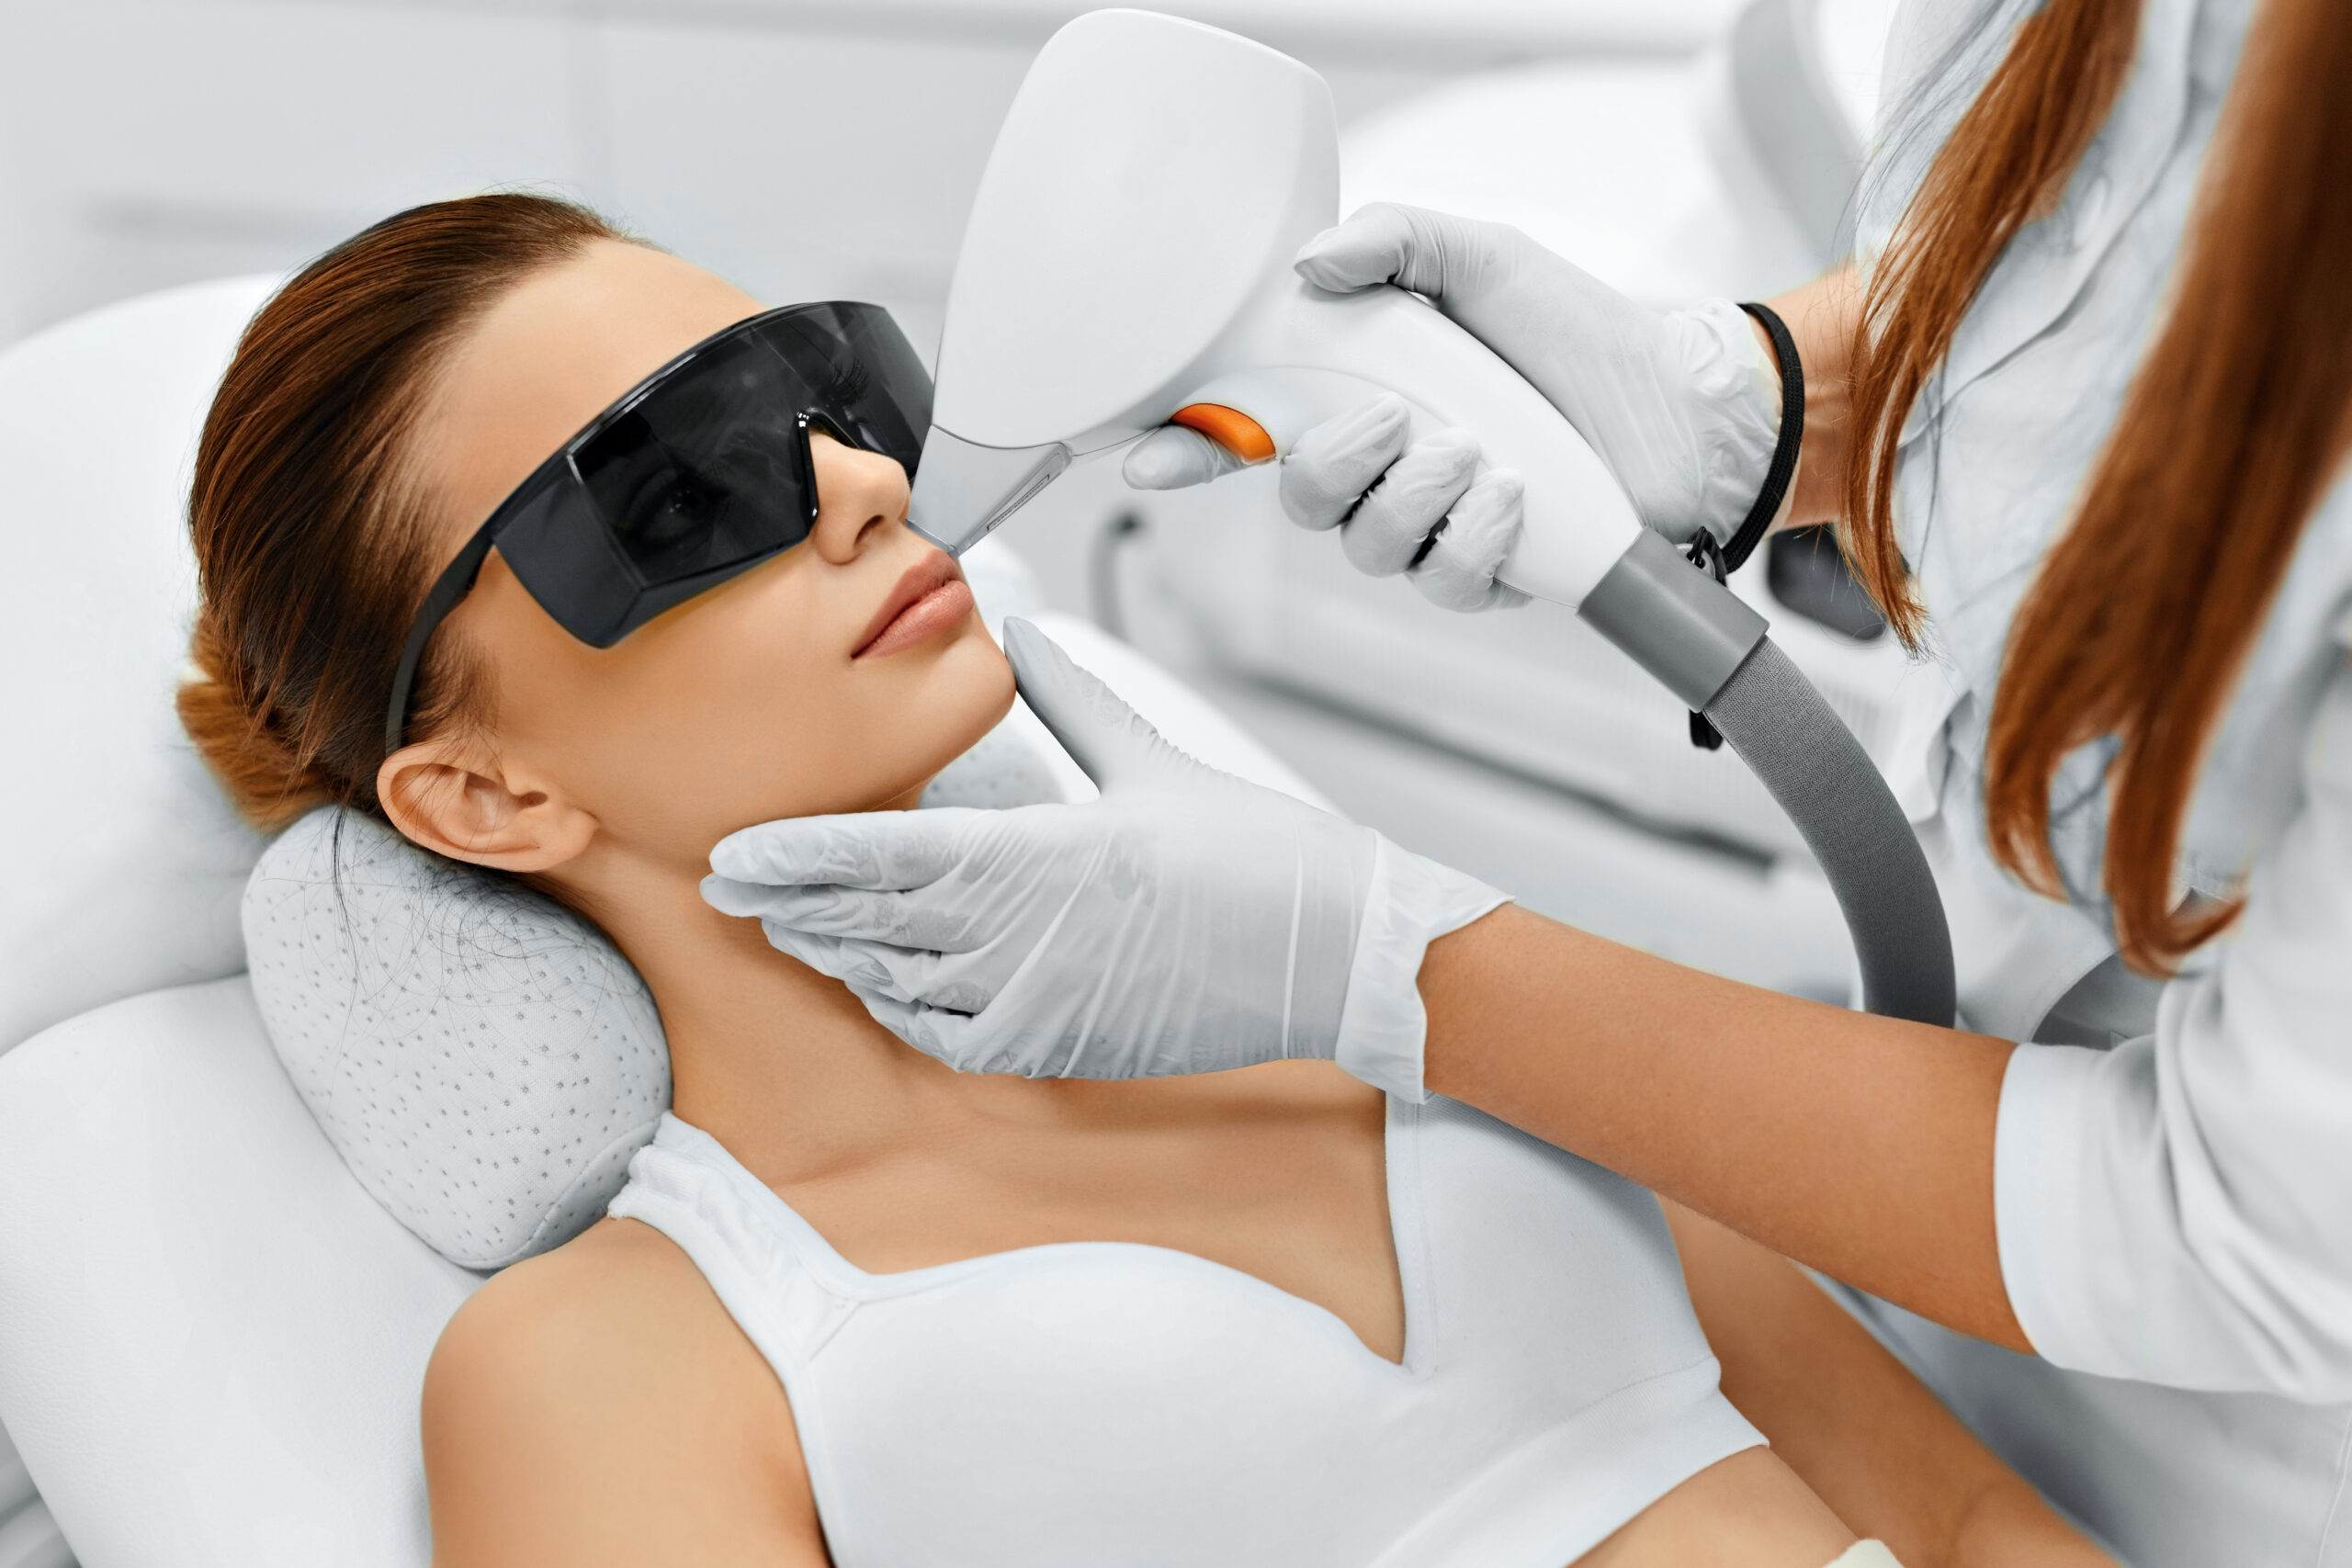 Woman receiving laser treatment on face